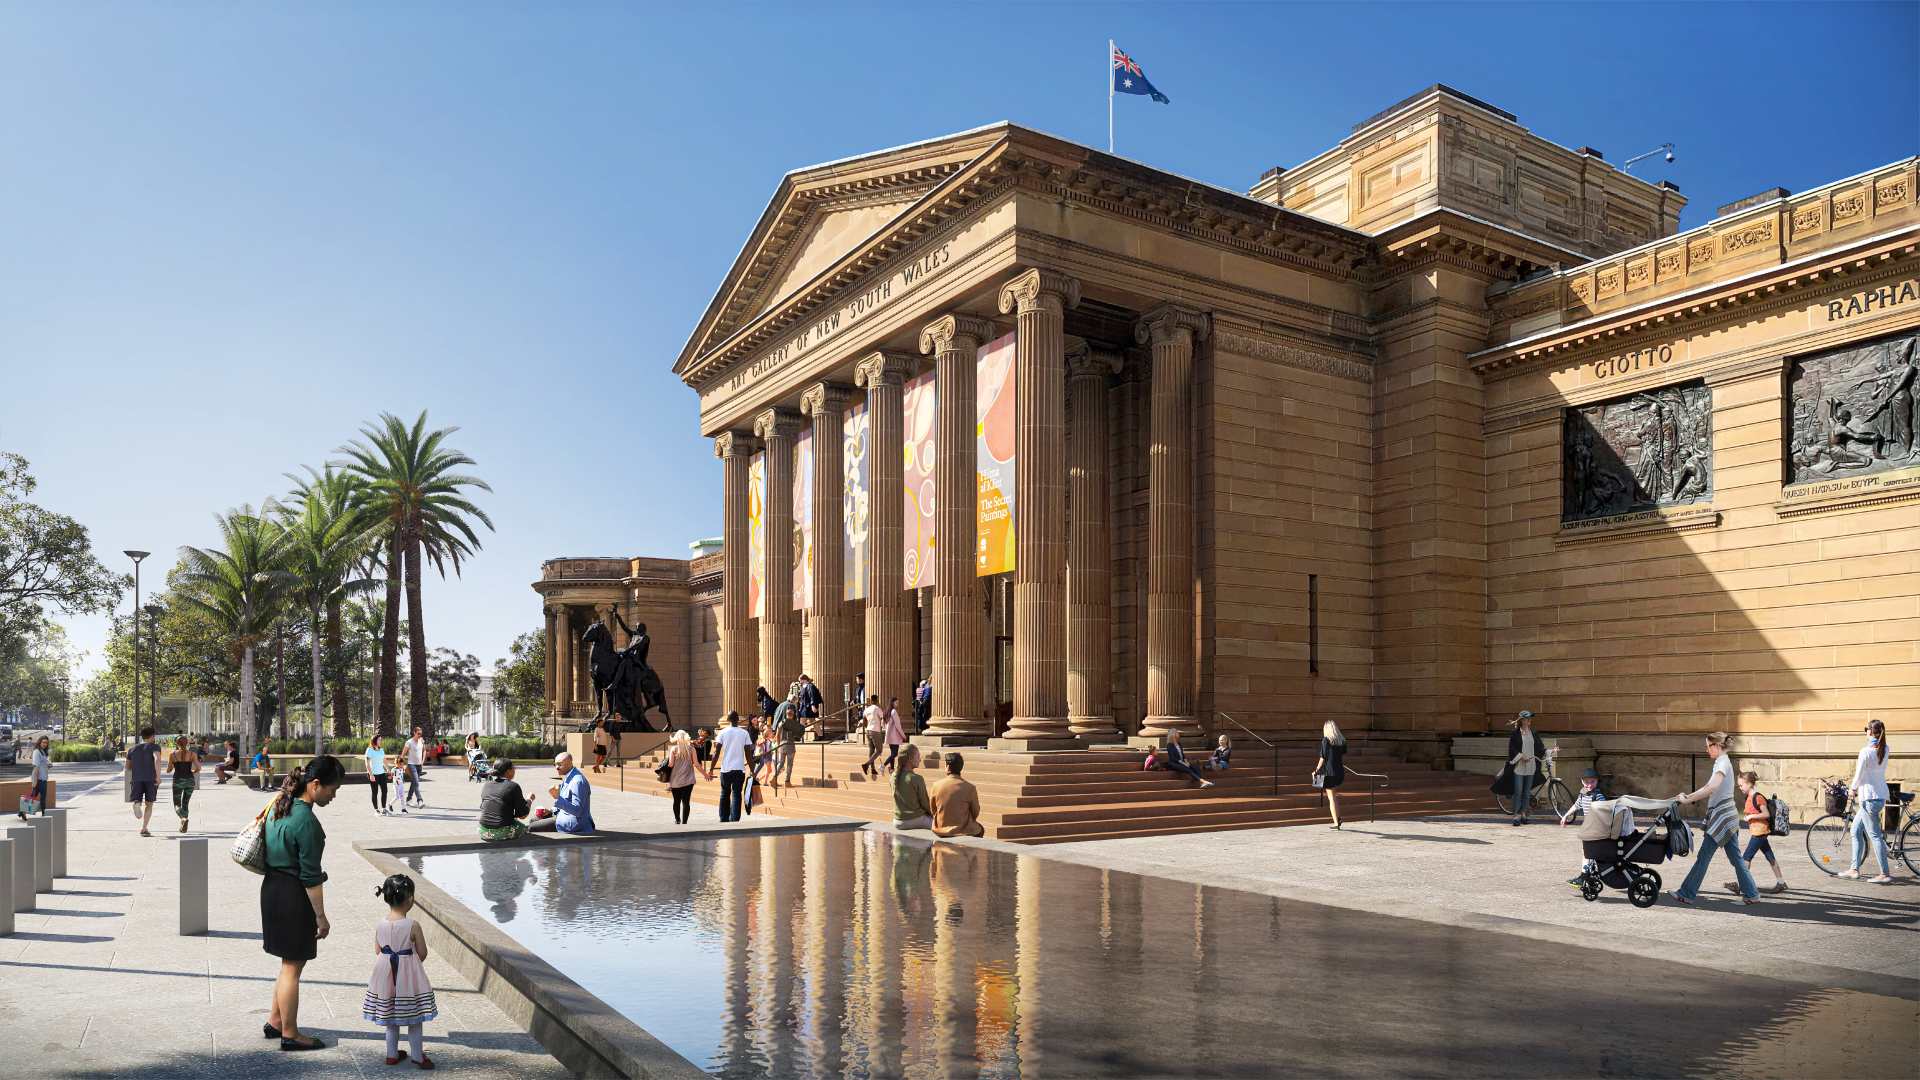 The Art Gallery of NSW's Forecourt Is Set to Be Transformed with New Pools and Public Spaces